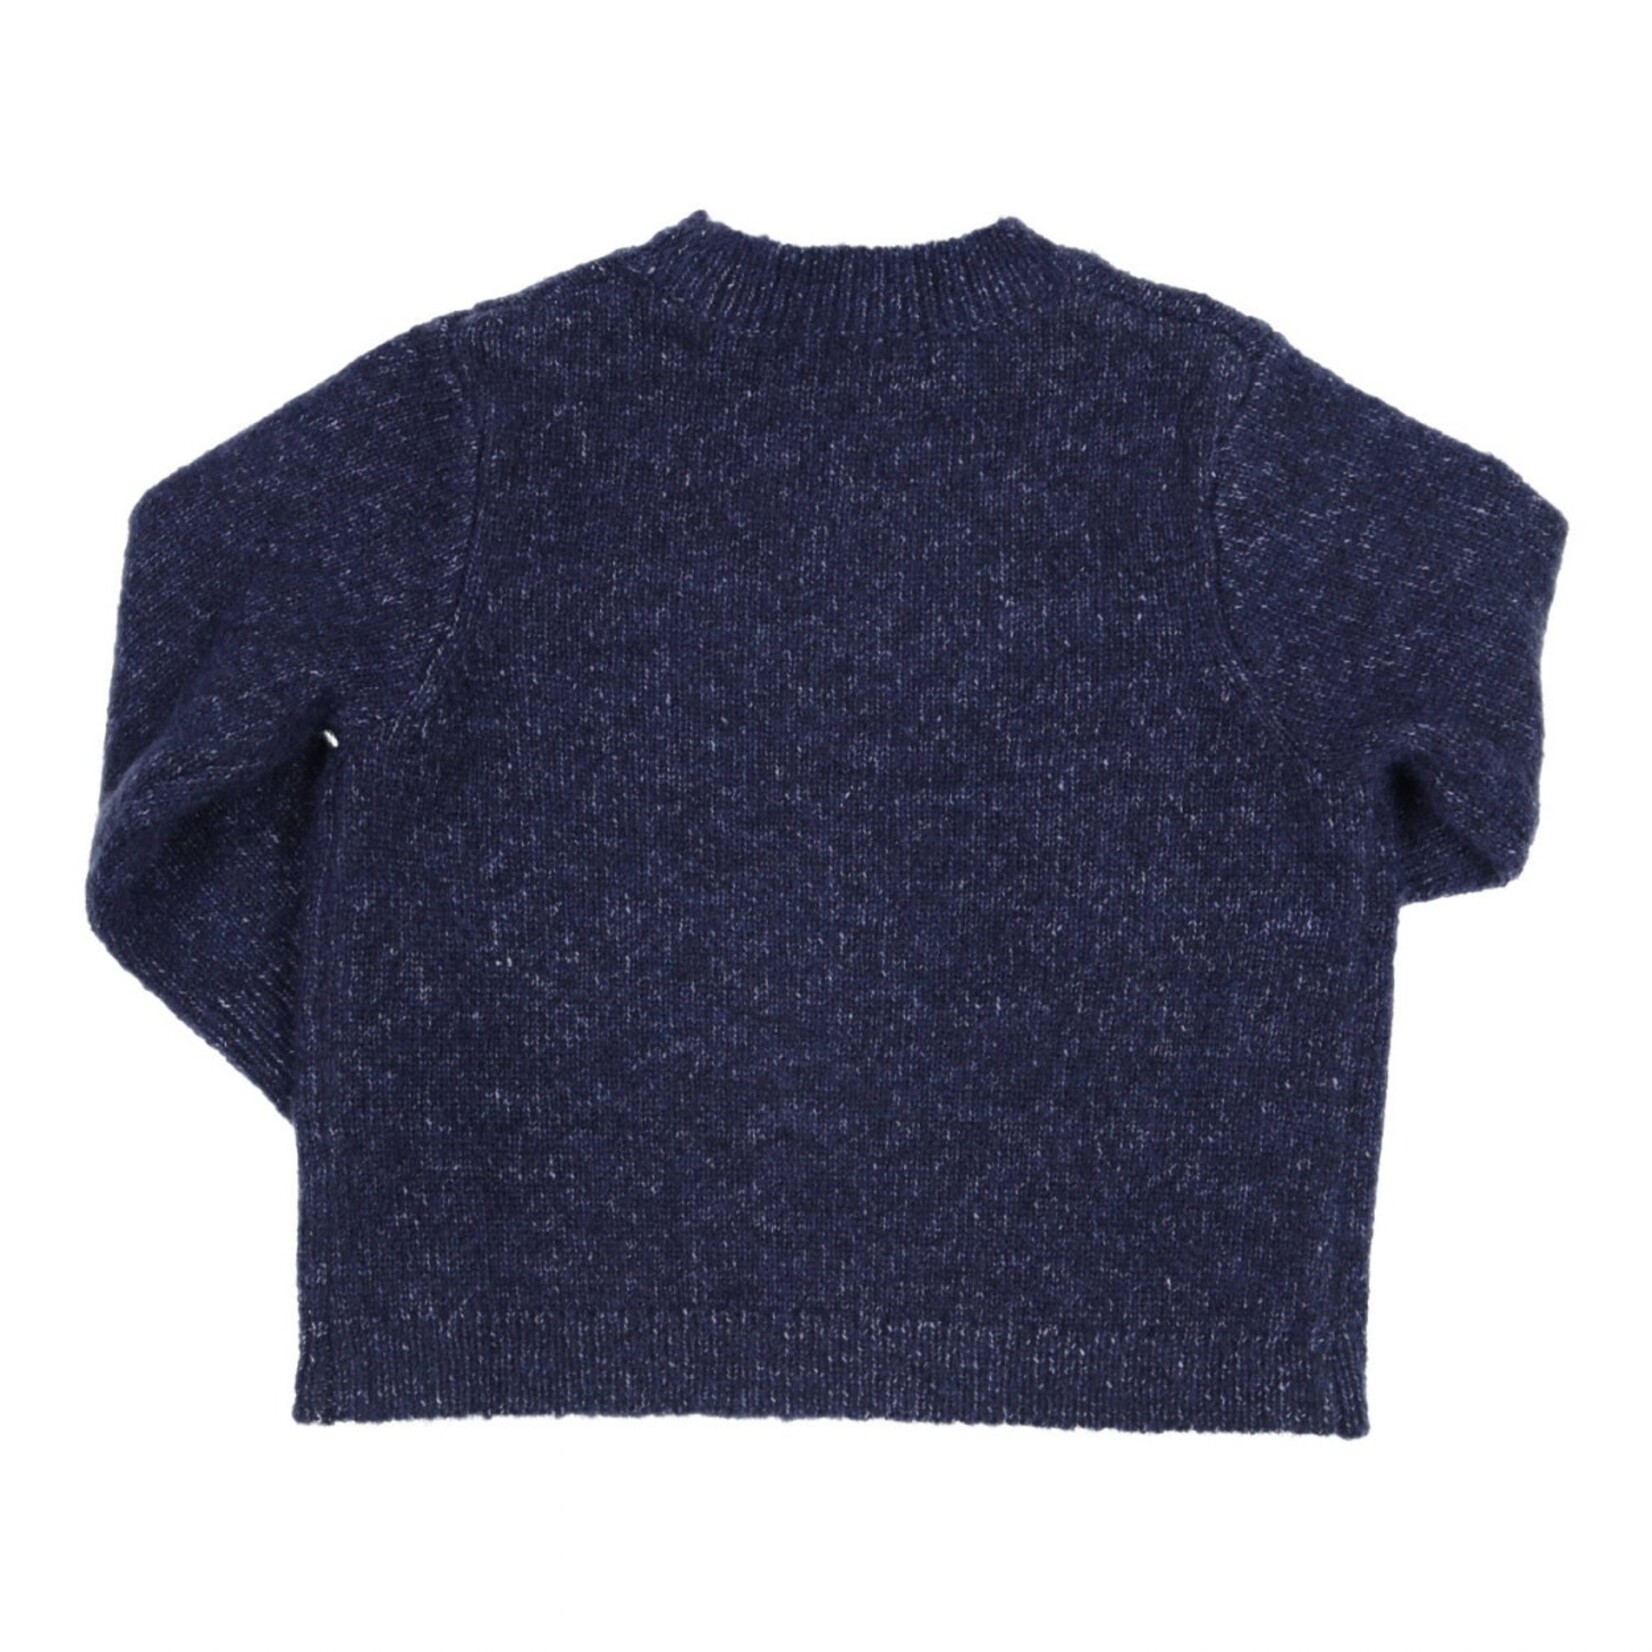 Gymp Pullover Gilly_Navy